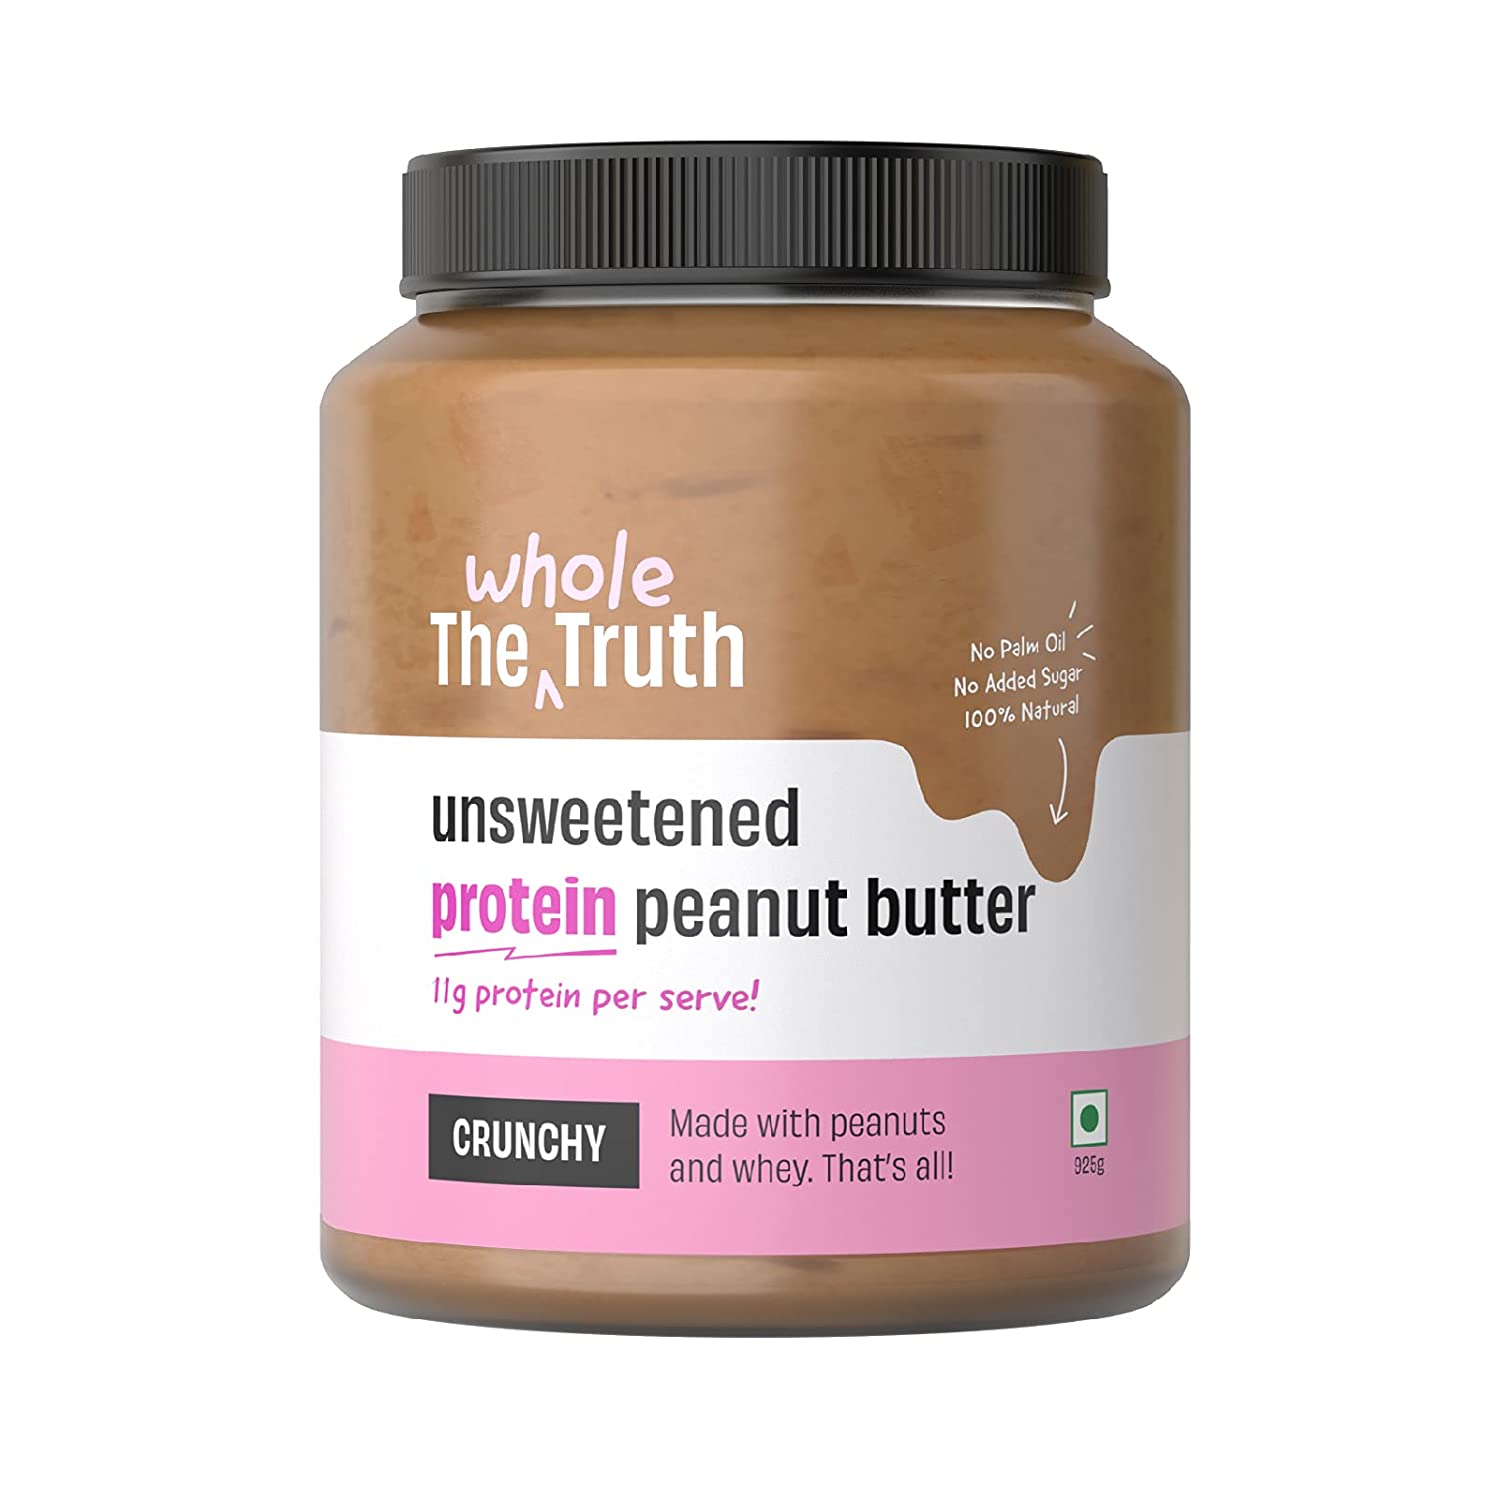 The Whole Truth Unsweetened Protein Peanut Butter Crunchy Image